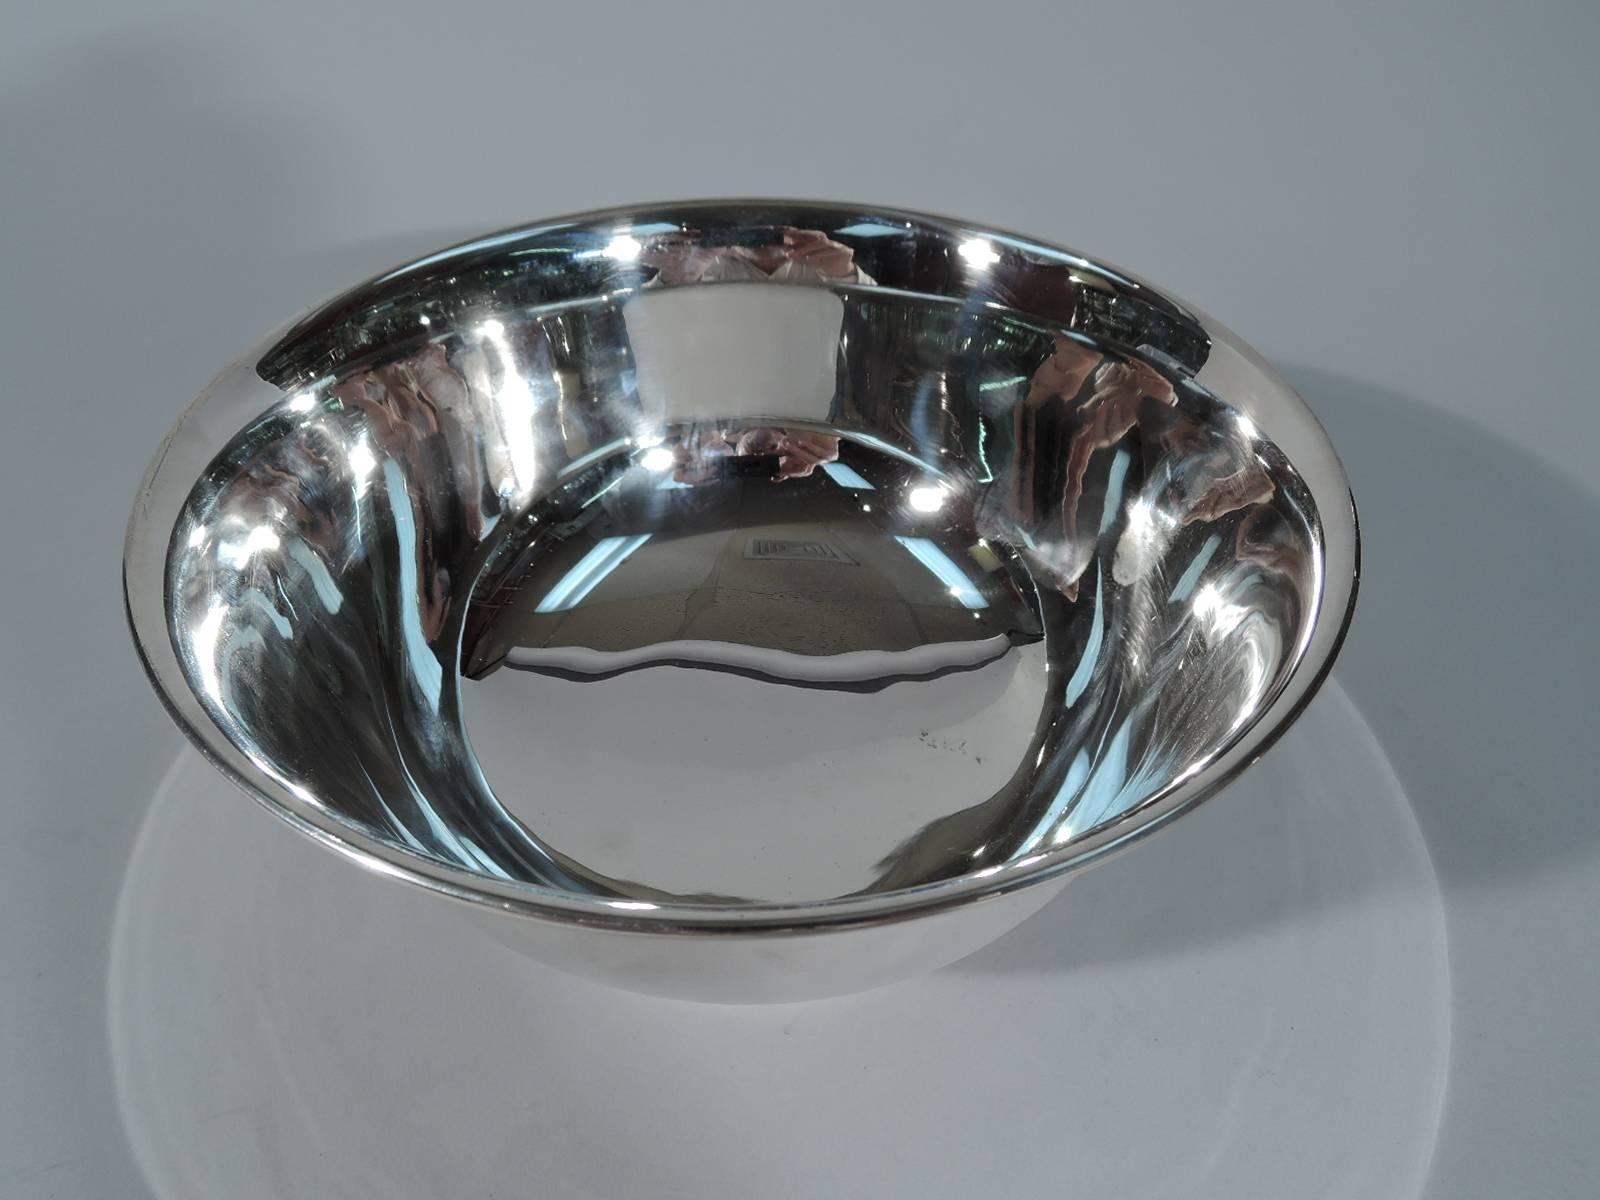 Sterling silver footed bowl. Made by Tiffany & Co. in New York, circa 1917. Curved with flared and molded rim and stepped foot. Traditional Revere form. Nice size. Hallmark includes pattern no. 19424A (first produced in 1917) and director’s letter m